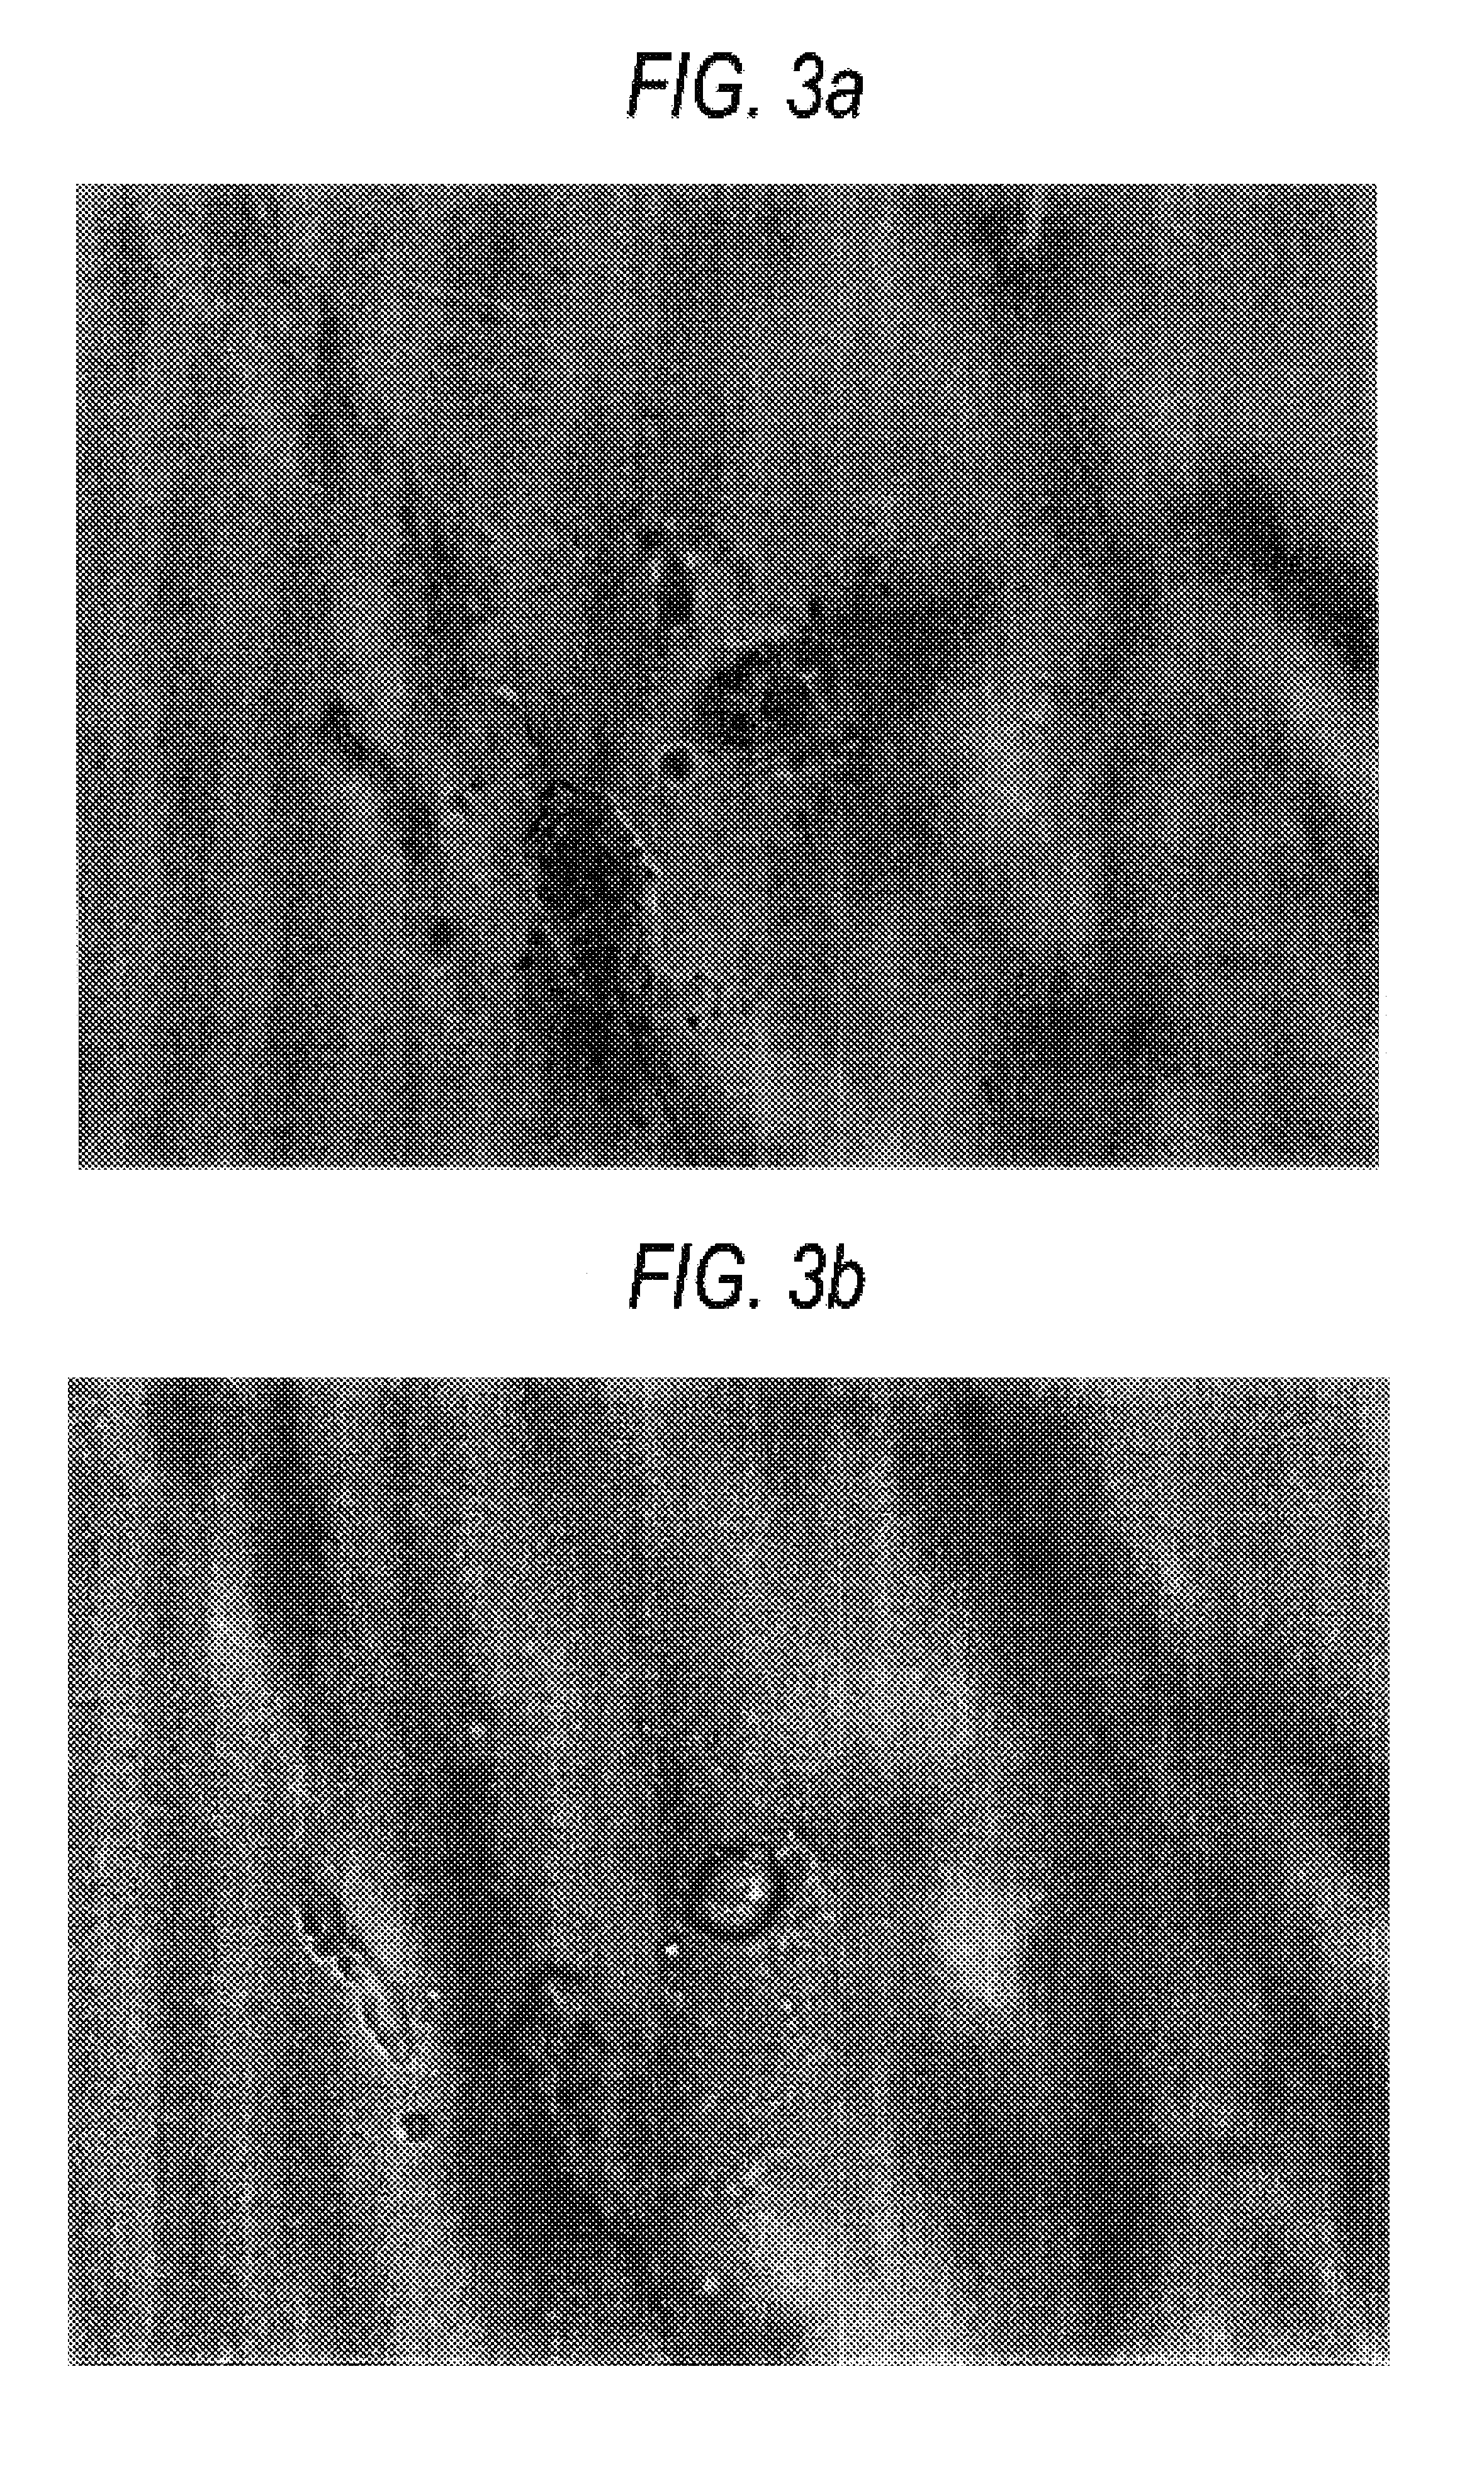 Method for introducing foreign matters into living cells